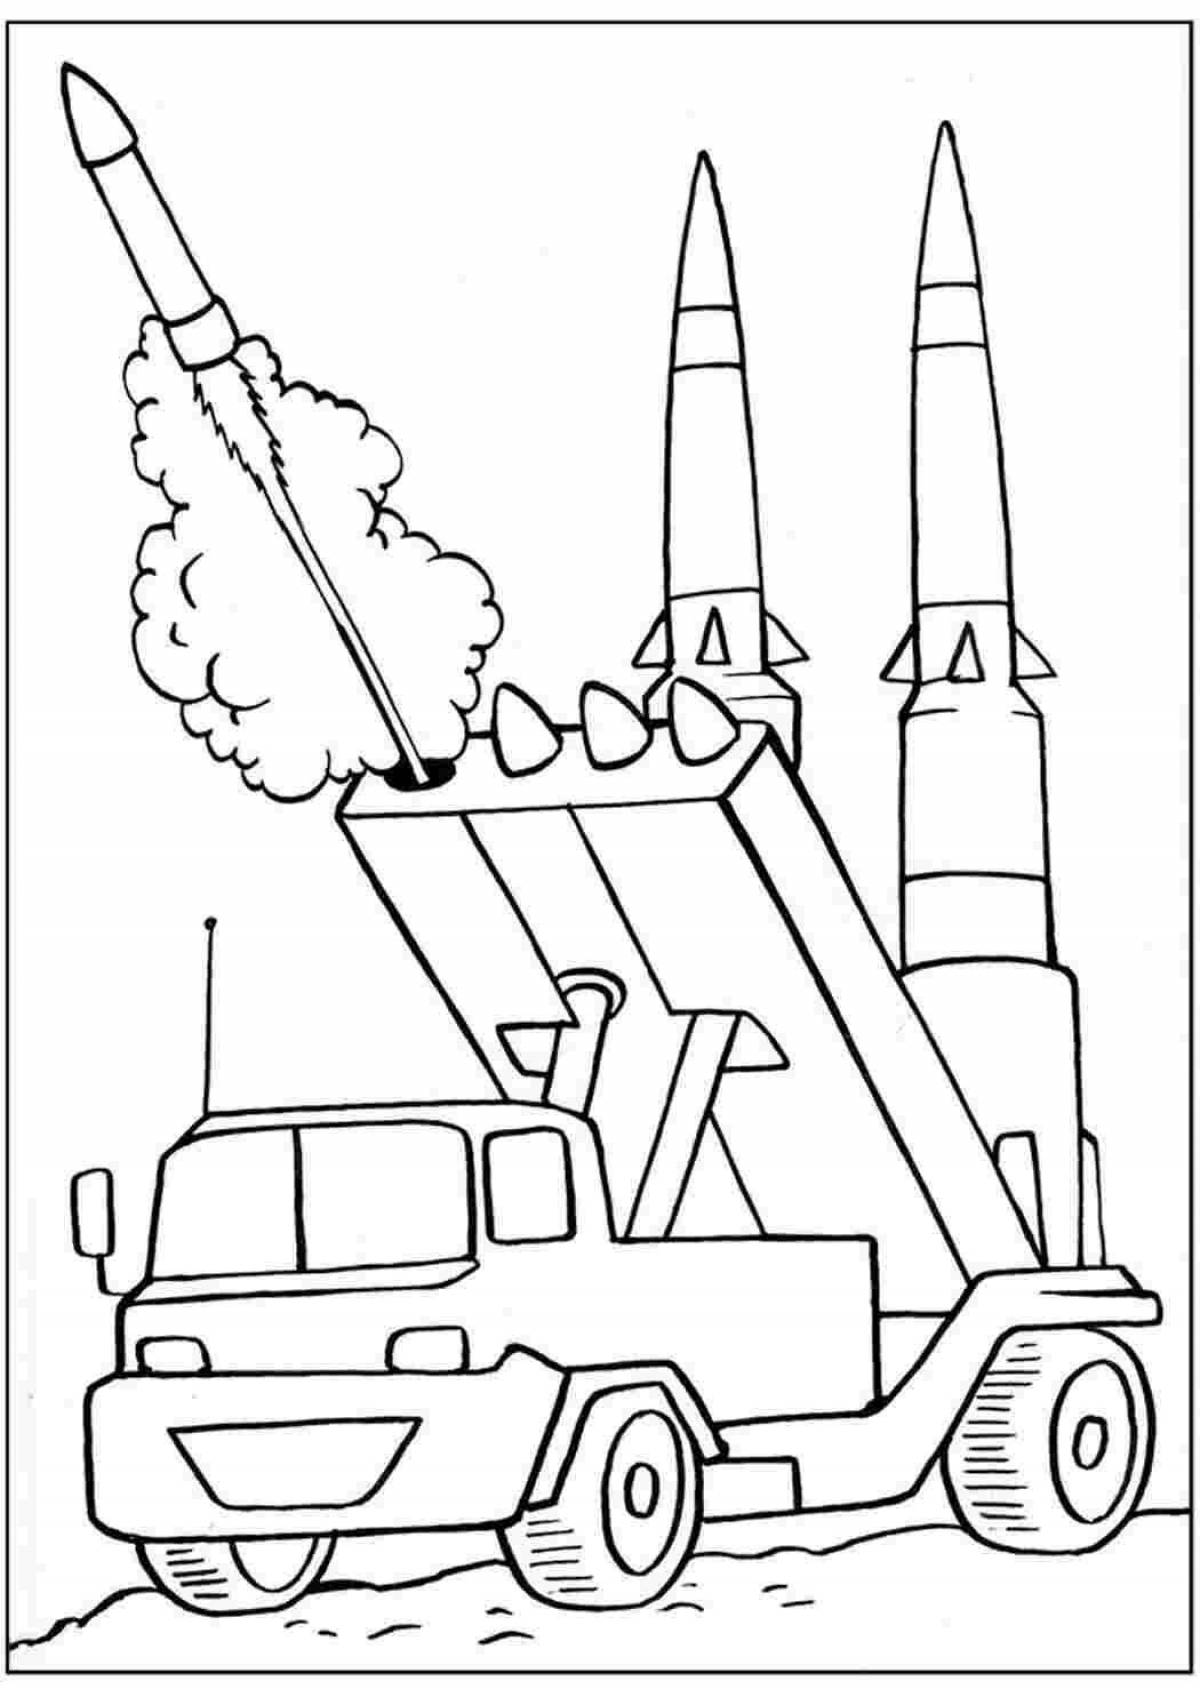 Inspiring military vehicle coloring book for 3-4 year olds